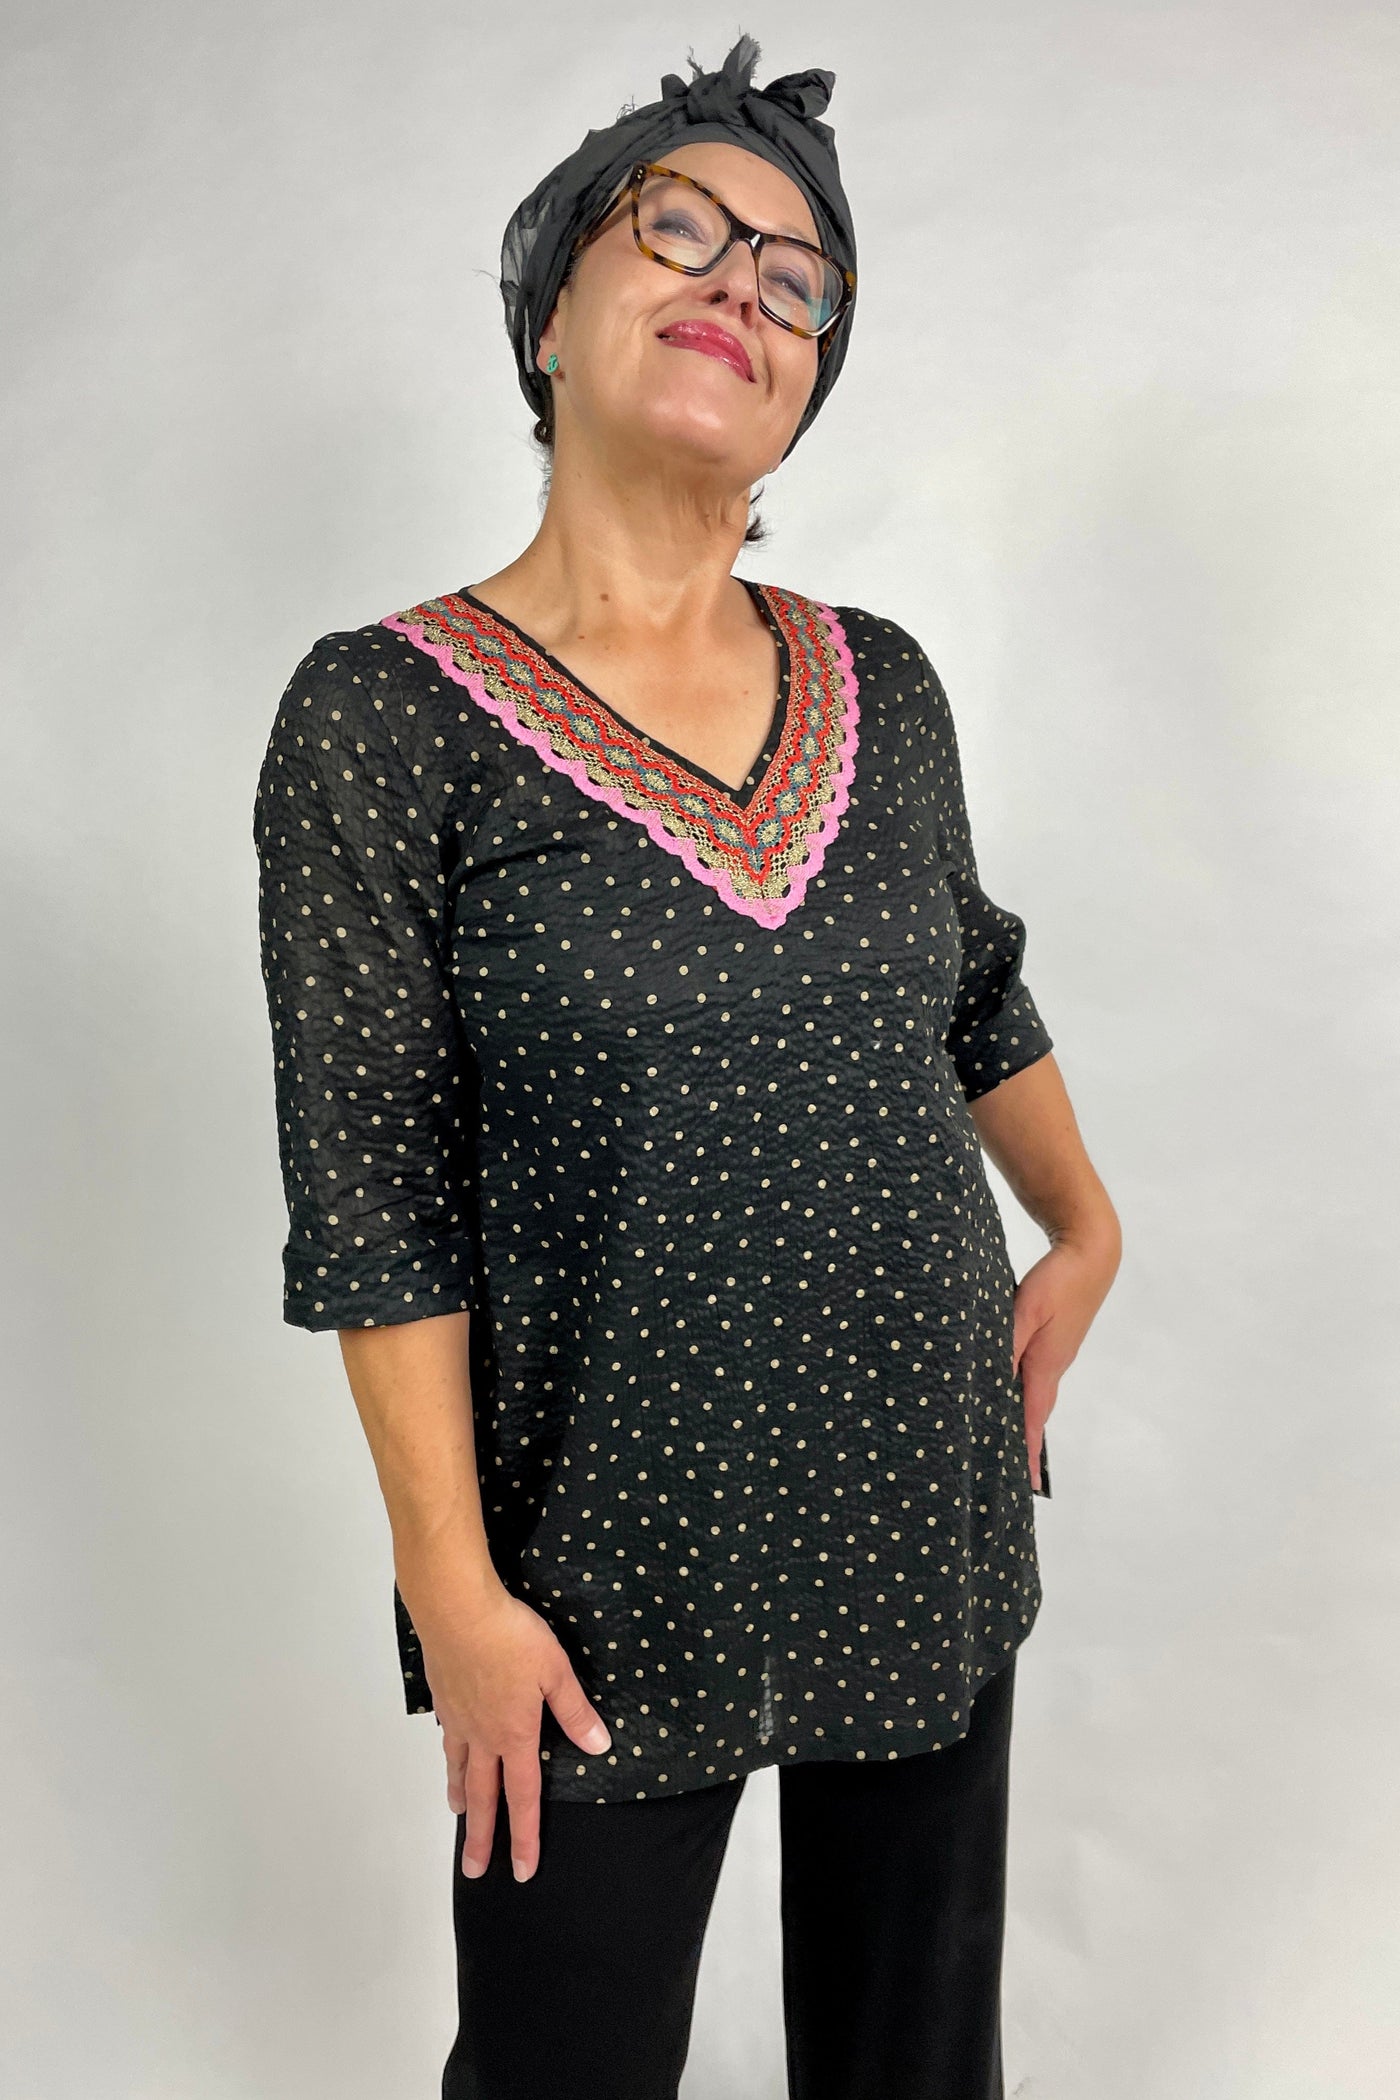 I Own This Ship Shirts & Tops festival of light tunic